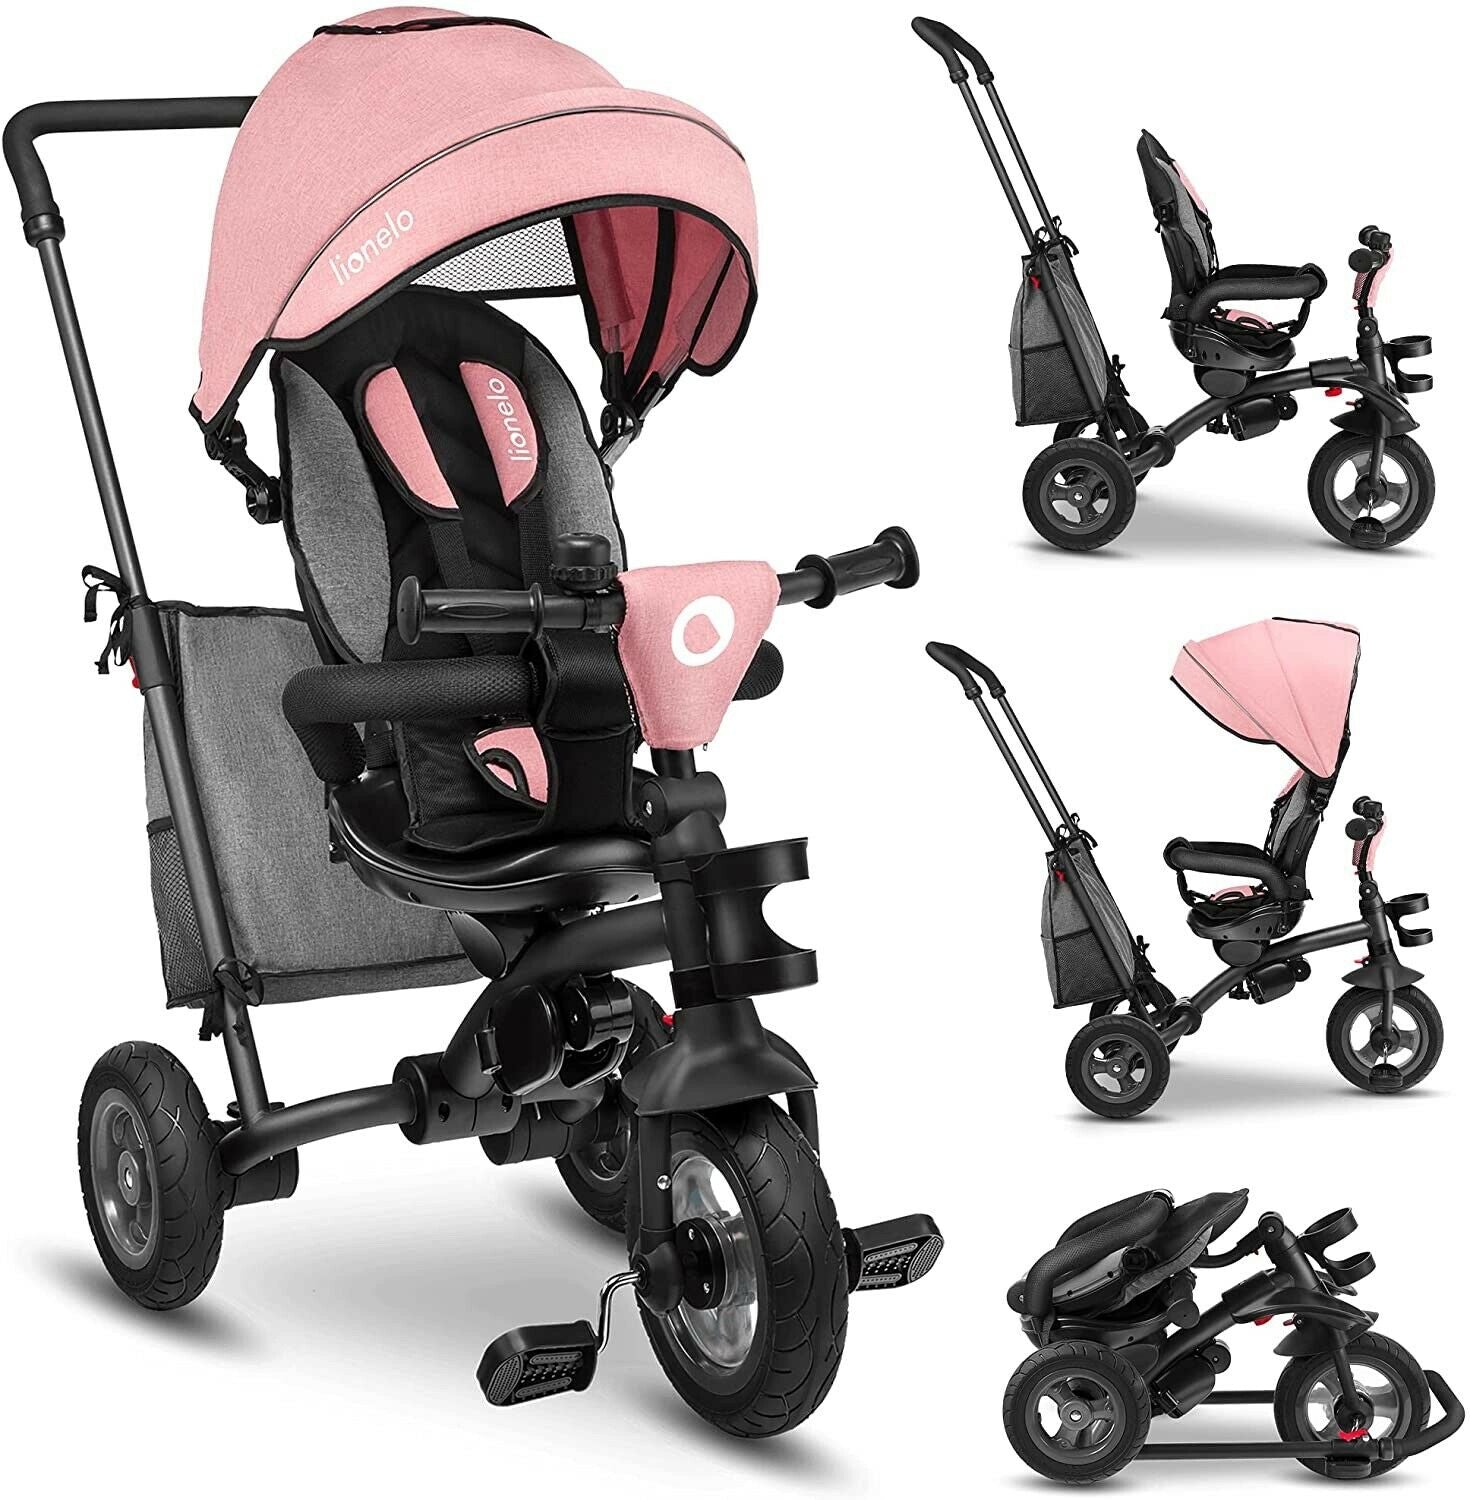 Bike Stroller Tricycle With Bag Lionelo Tris Candy Rose/Grey 2 In 1